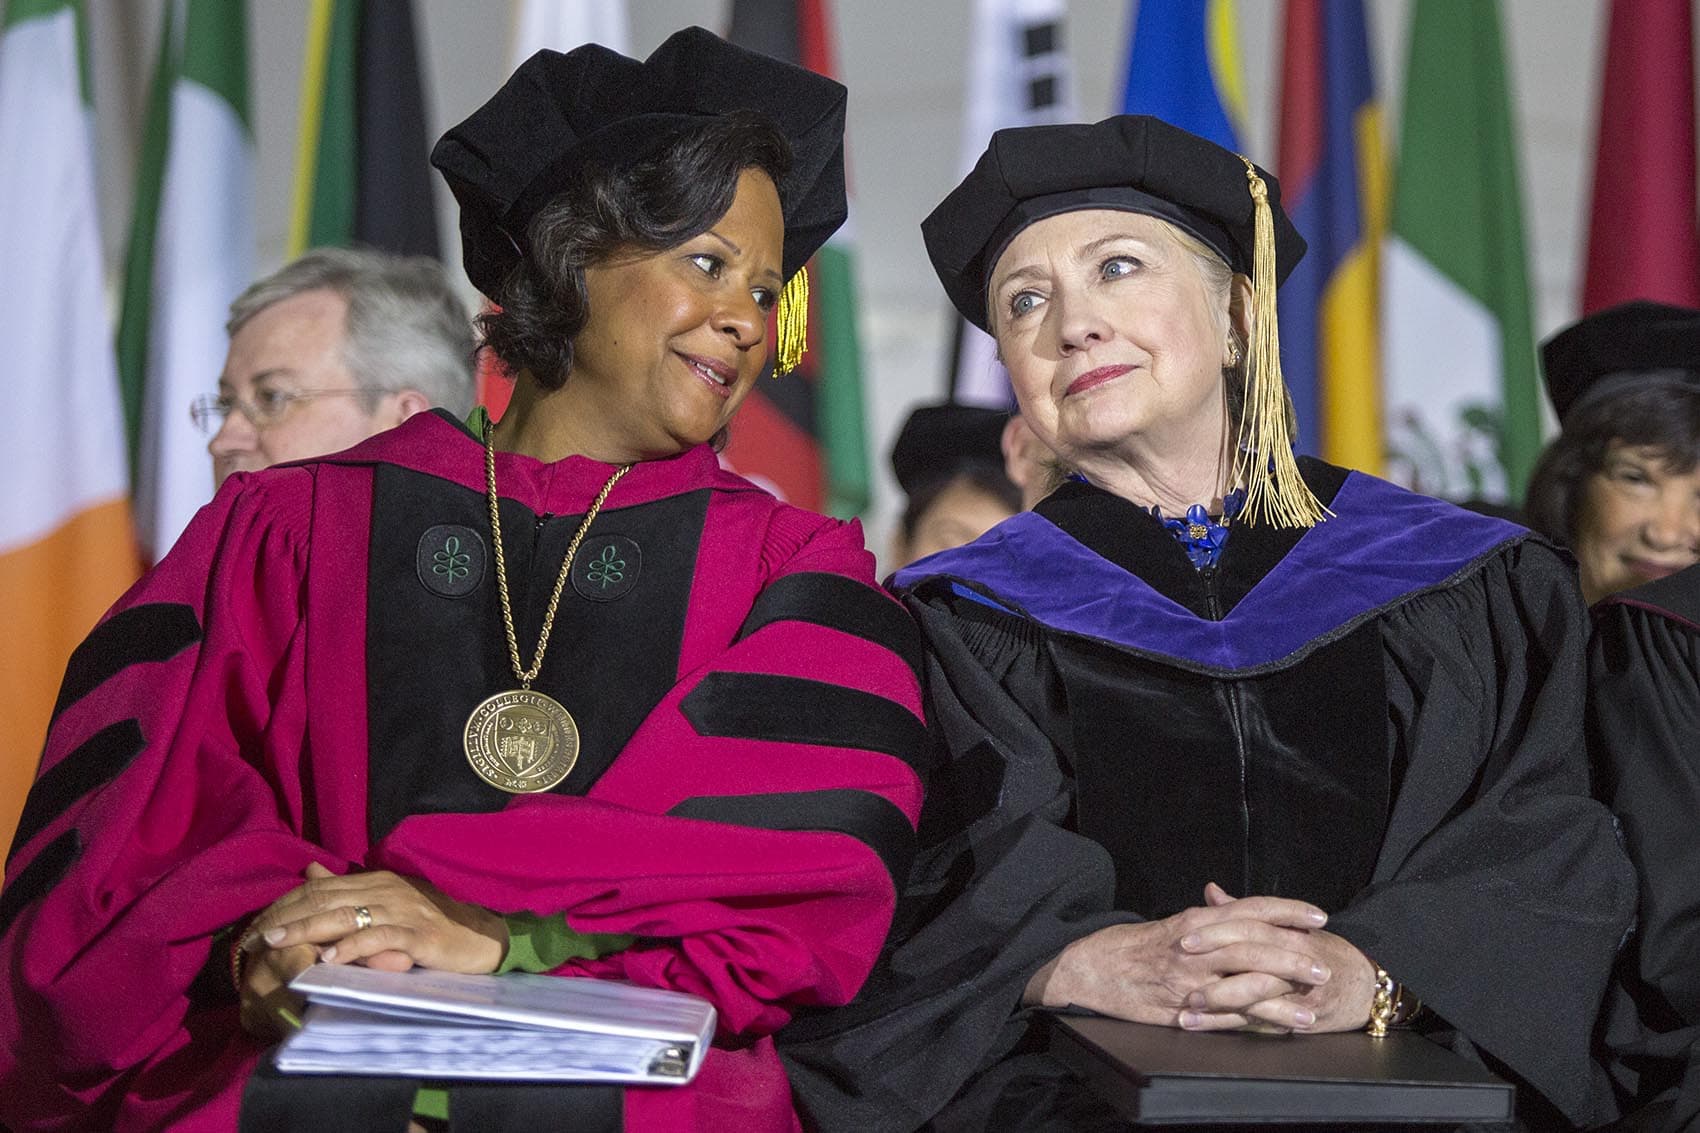 Wellesley College President Paula Johnson speaks with Hillary Clinton on stage during Friday's commencement. (Robin Lubbock/WBUR)